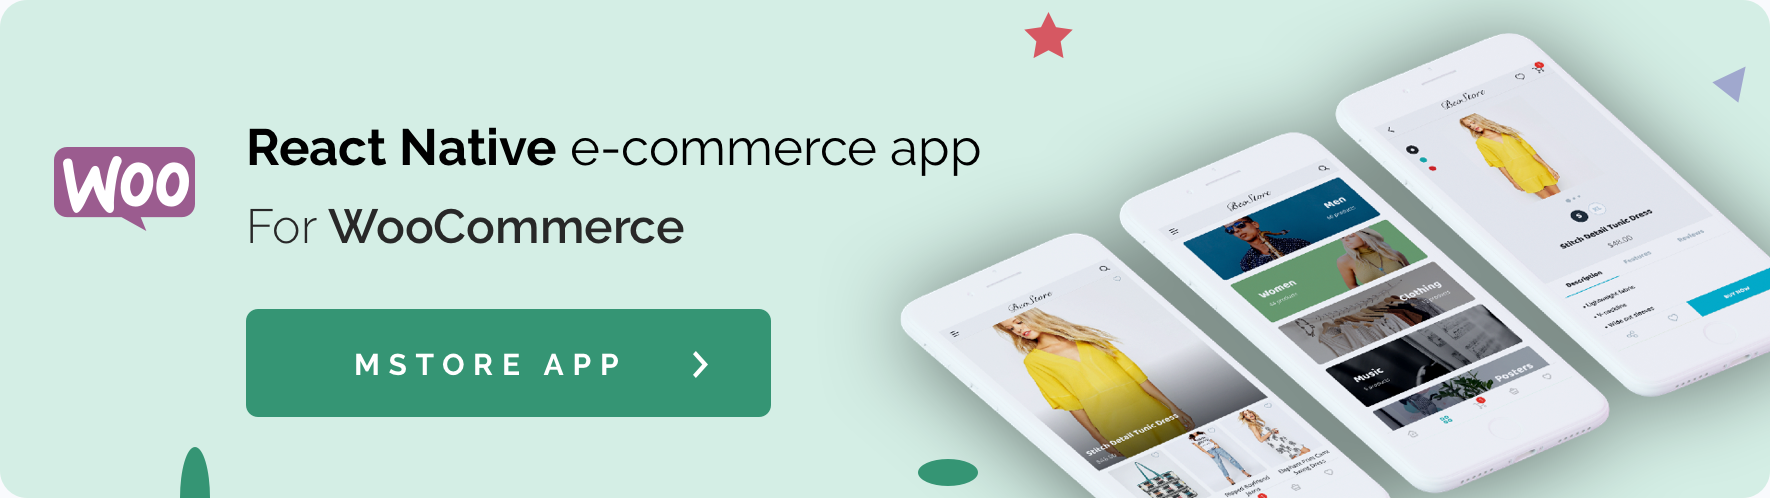 MStore Opencart - the complete react native e-commerce app (Expo version) - 9